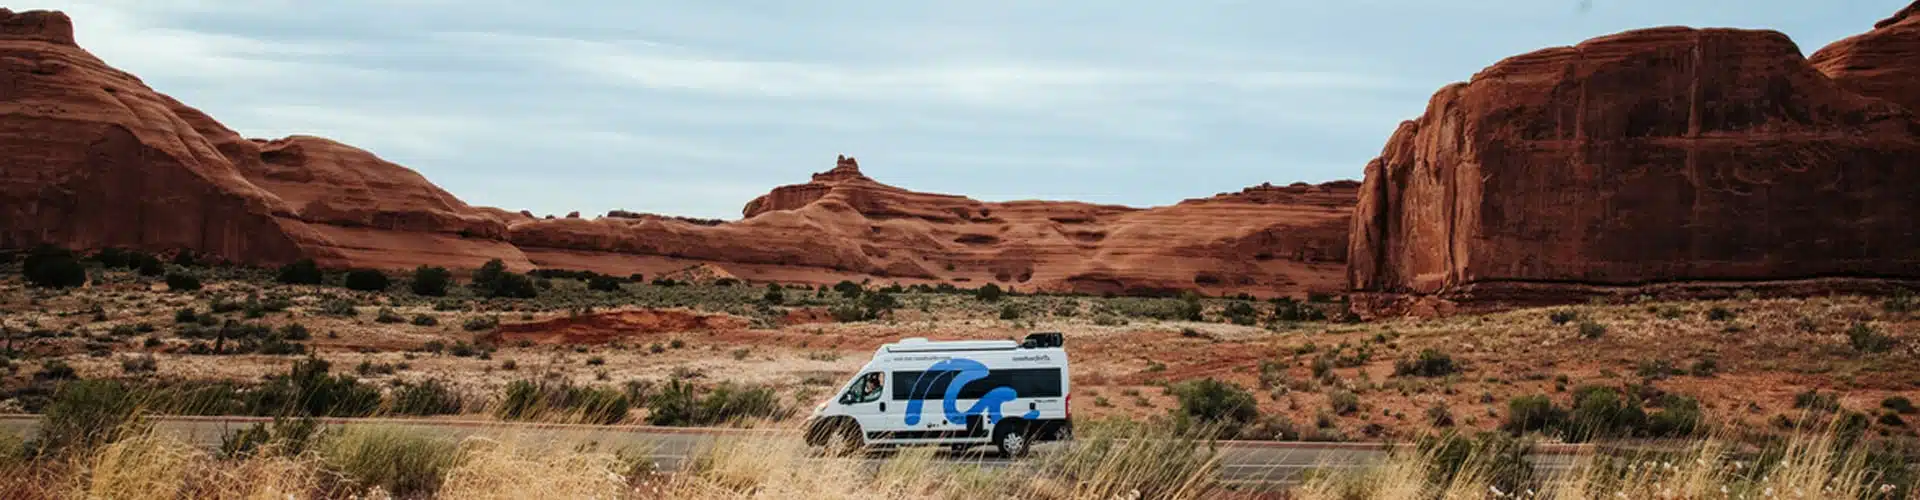 roadsurfer campervan in the usa driving through a red stone landscape